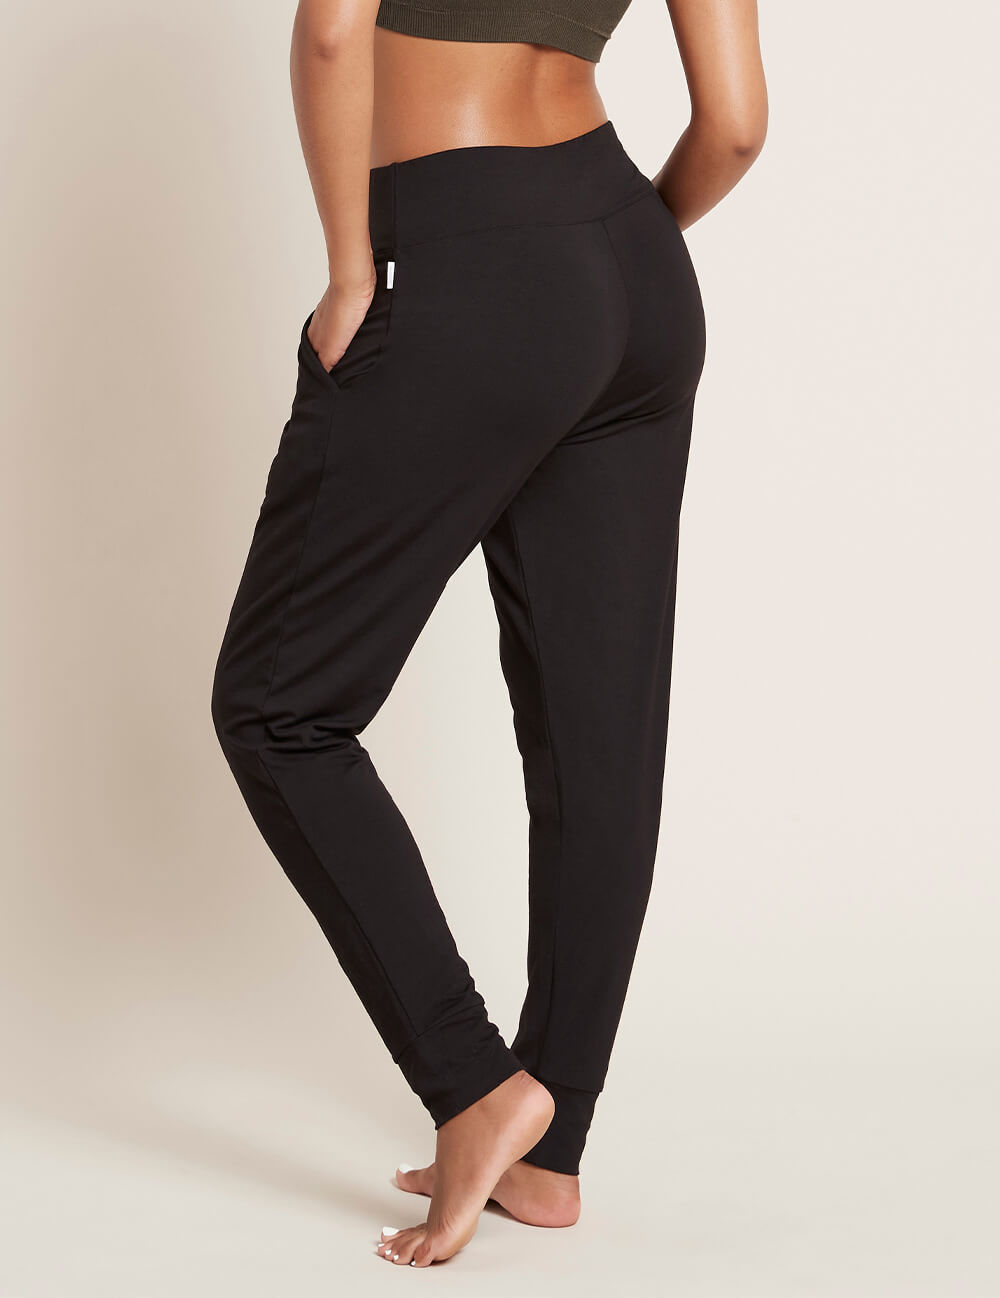 Boody Eco Wear Women's Pants: Sale, Clearance & Outlet